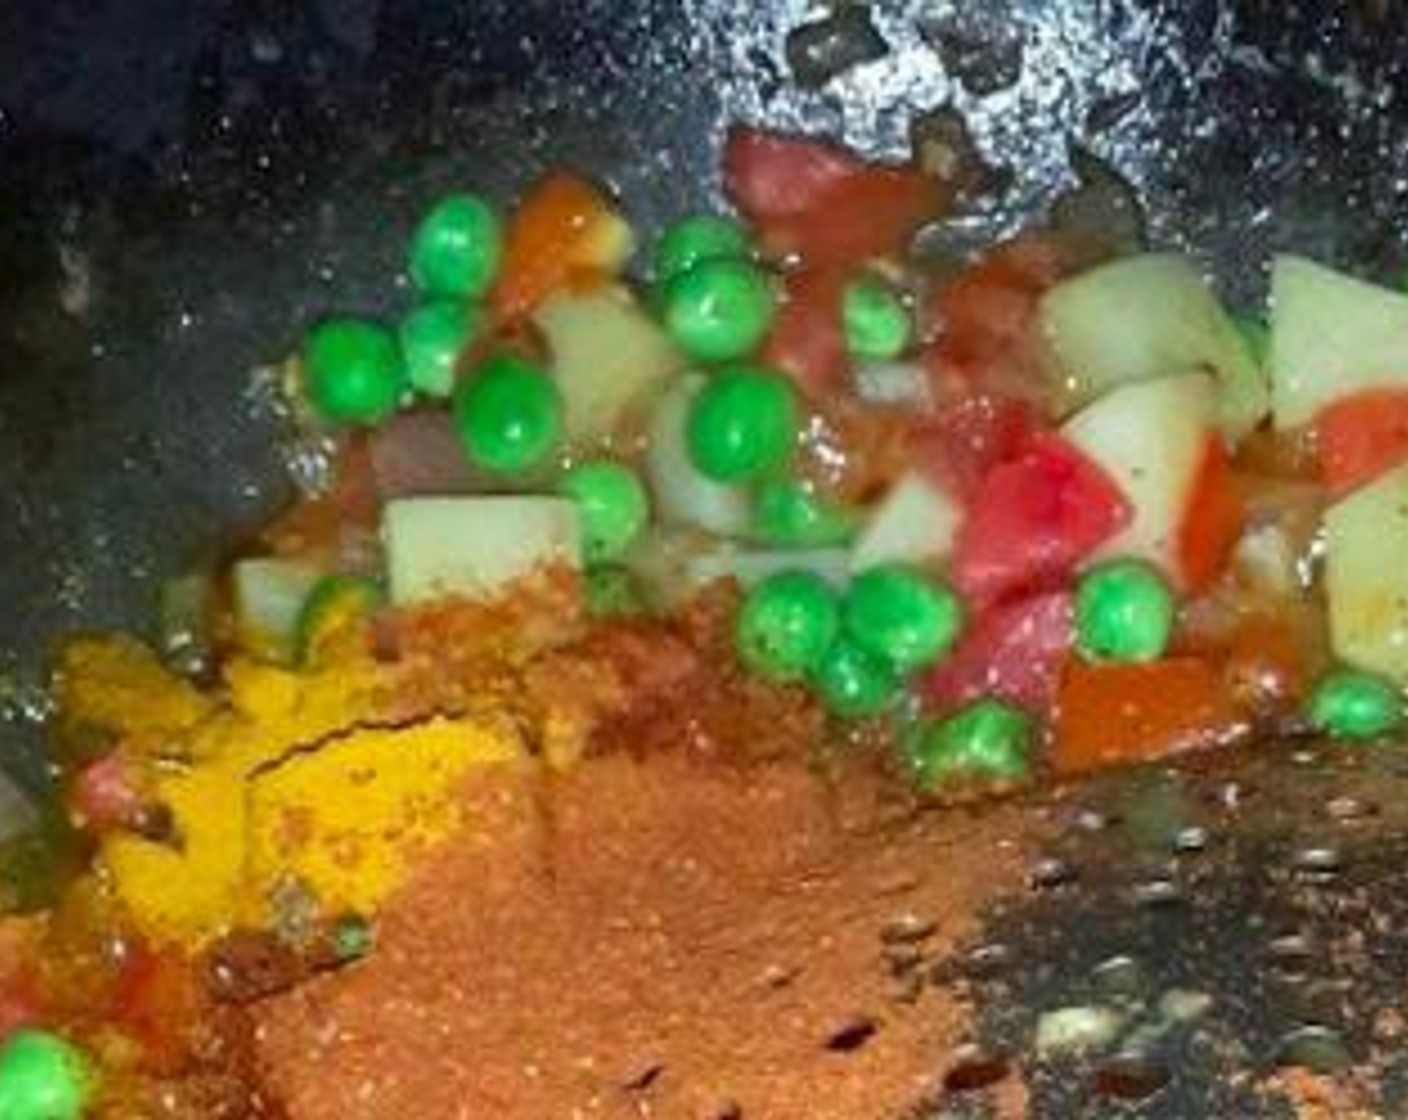 step 6 Now add the Potato (1), Carrot (1), Bell Peppers (2 Tbsp) and Green Peas (1/2 cup). Saute for few minutes and then add Tomatoes (2), stir and add the Ground Turmeric (1/4 tsp), Kashmiri Red Chili Powder (1/4 tsp), Garam Masala (1/4 tsp), Pav Bhaji Masala (1/4 tsp) and salt.